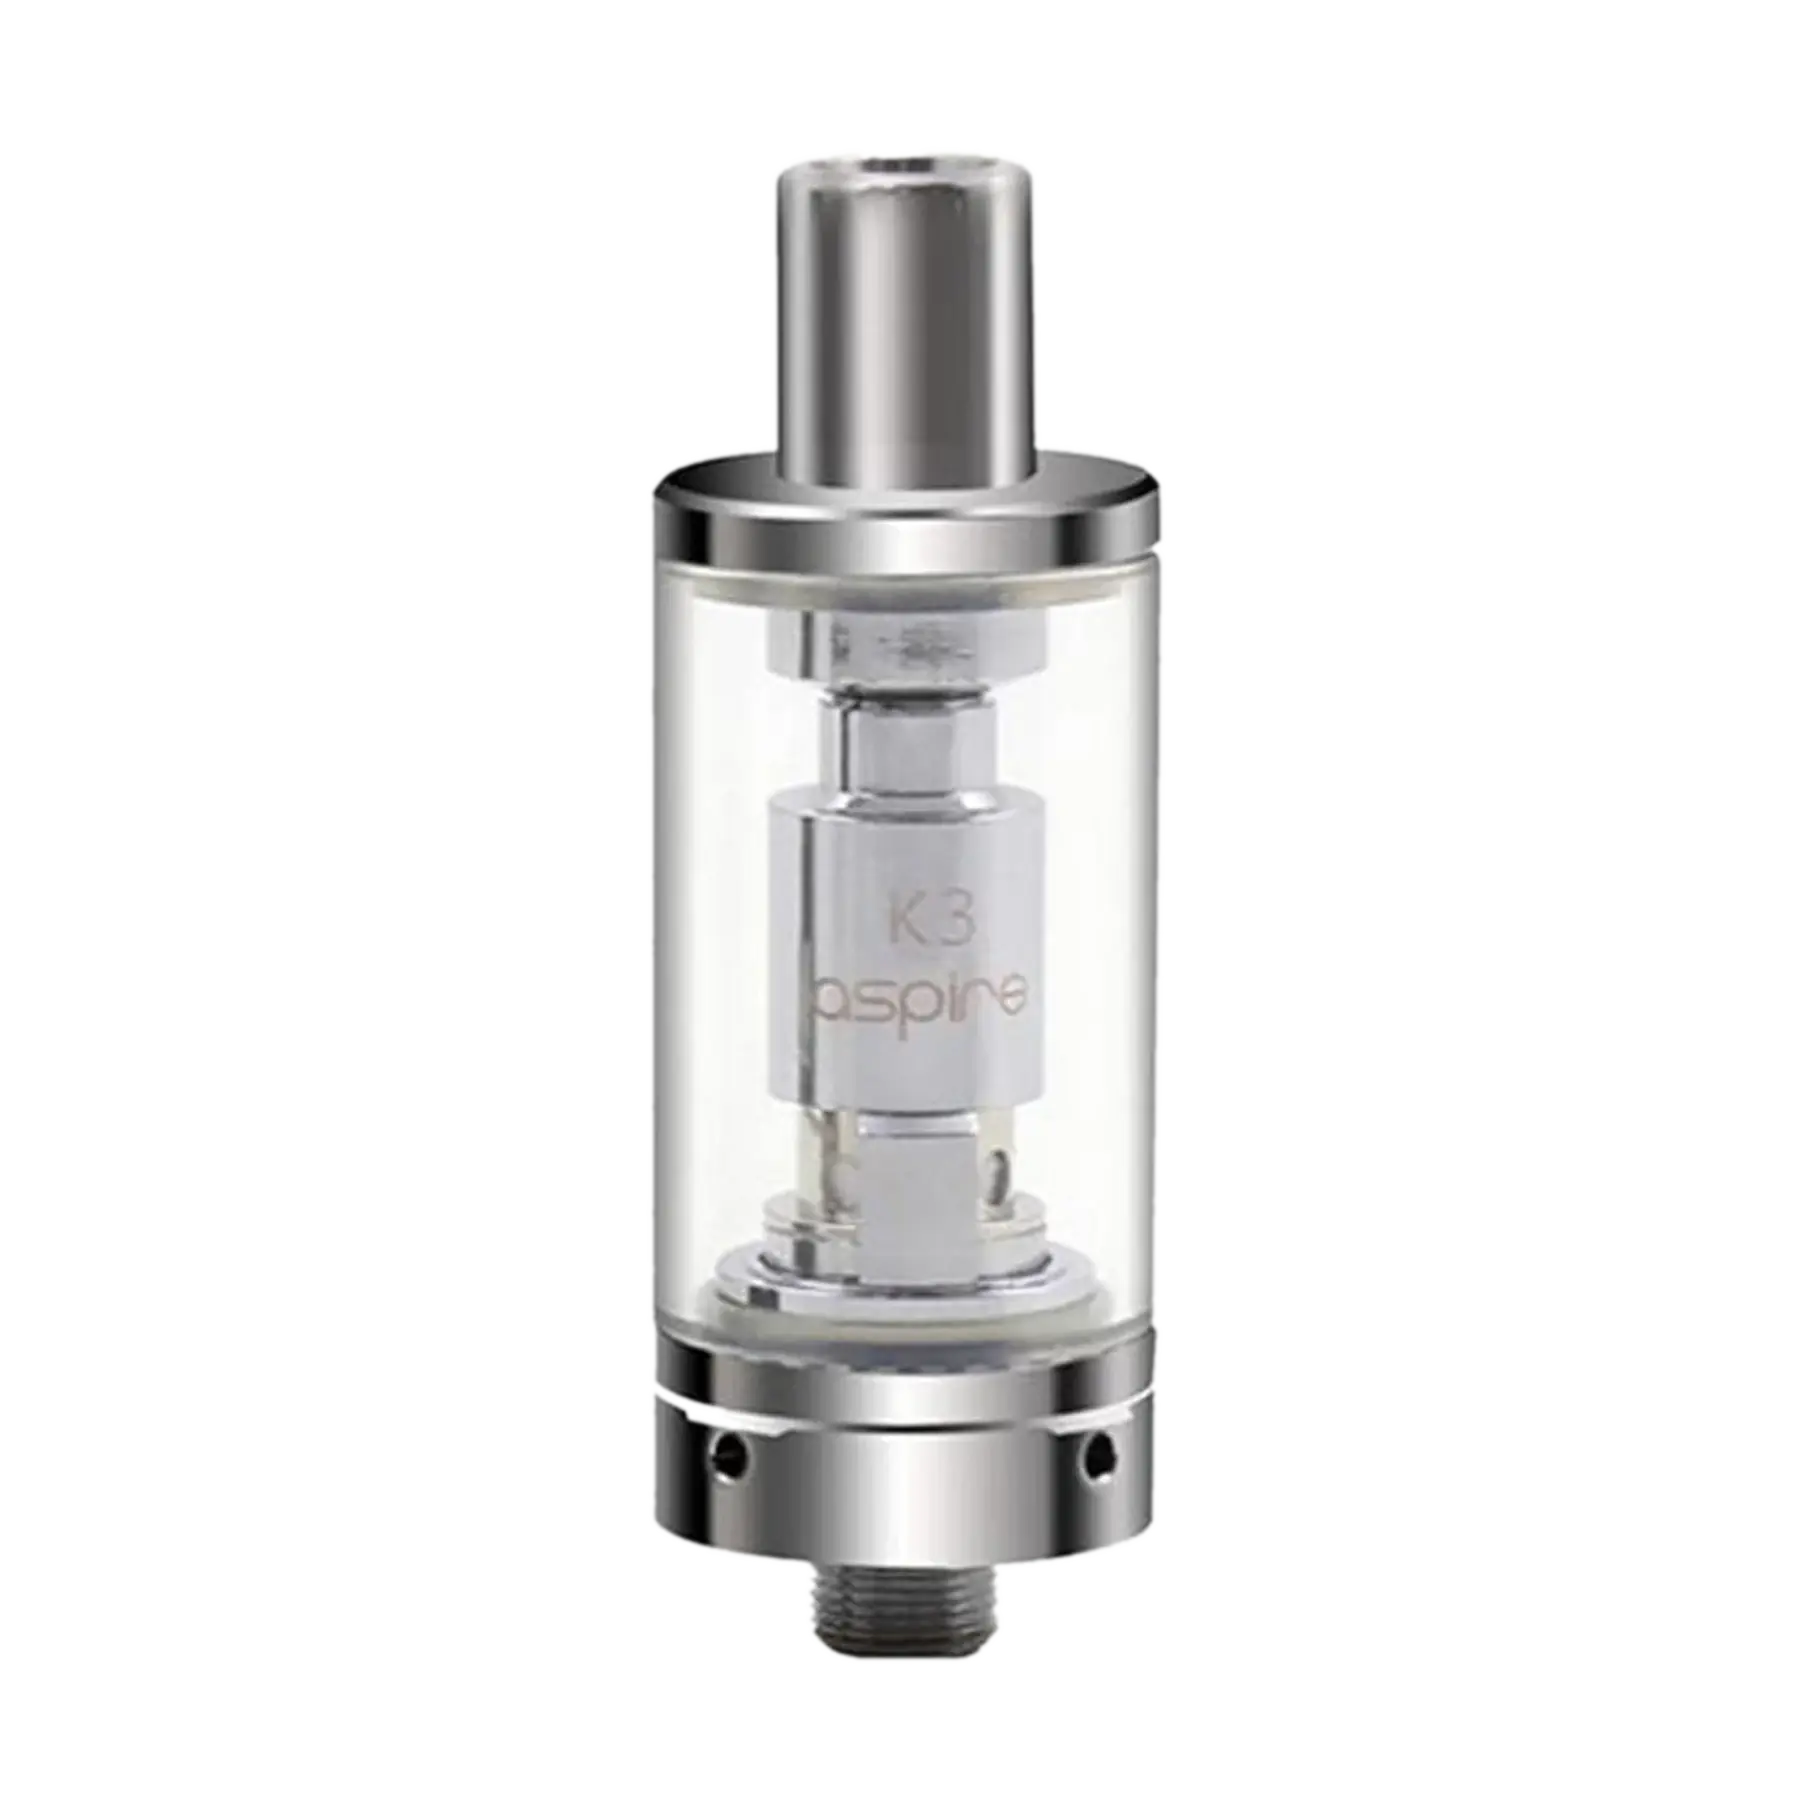 Aspire UK K3 Mouth To Lung Tank - Stainless Steel